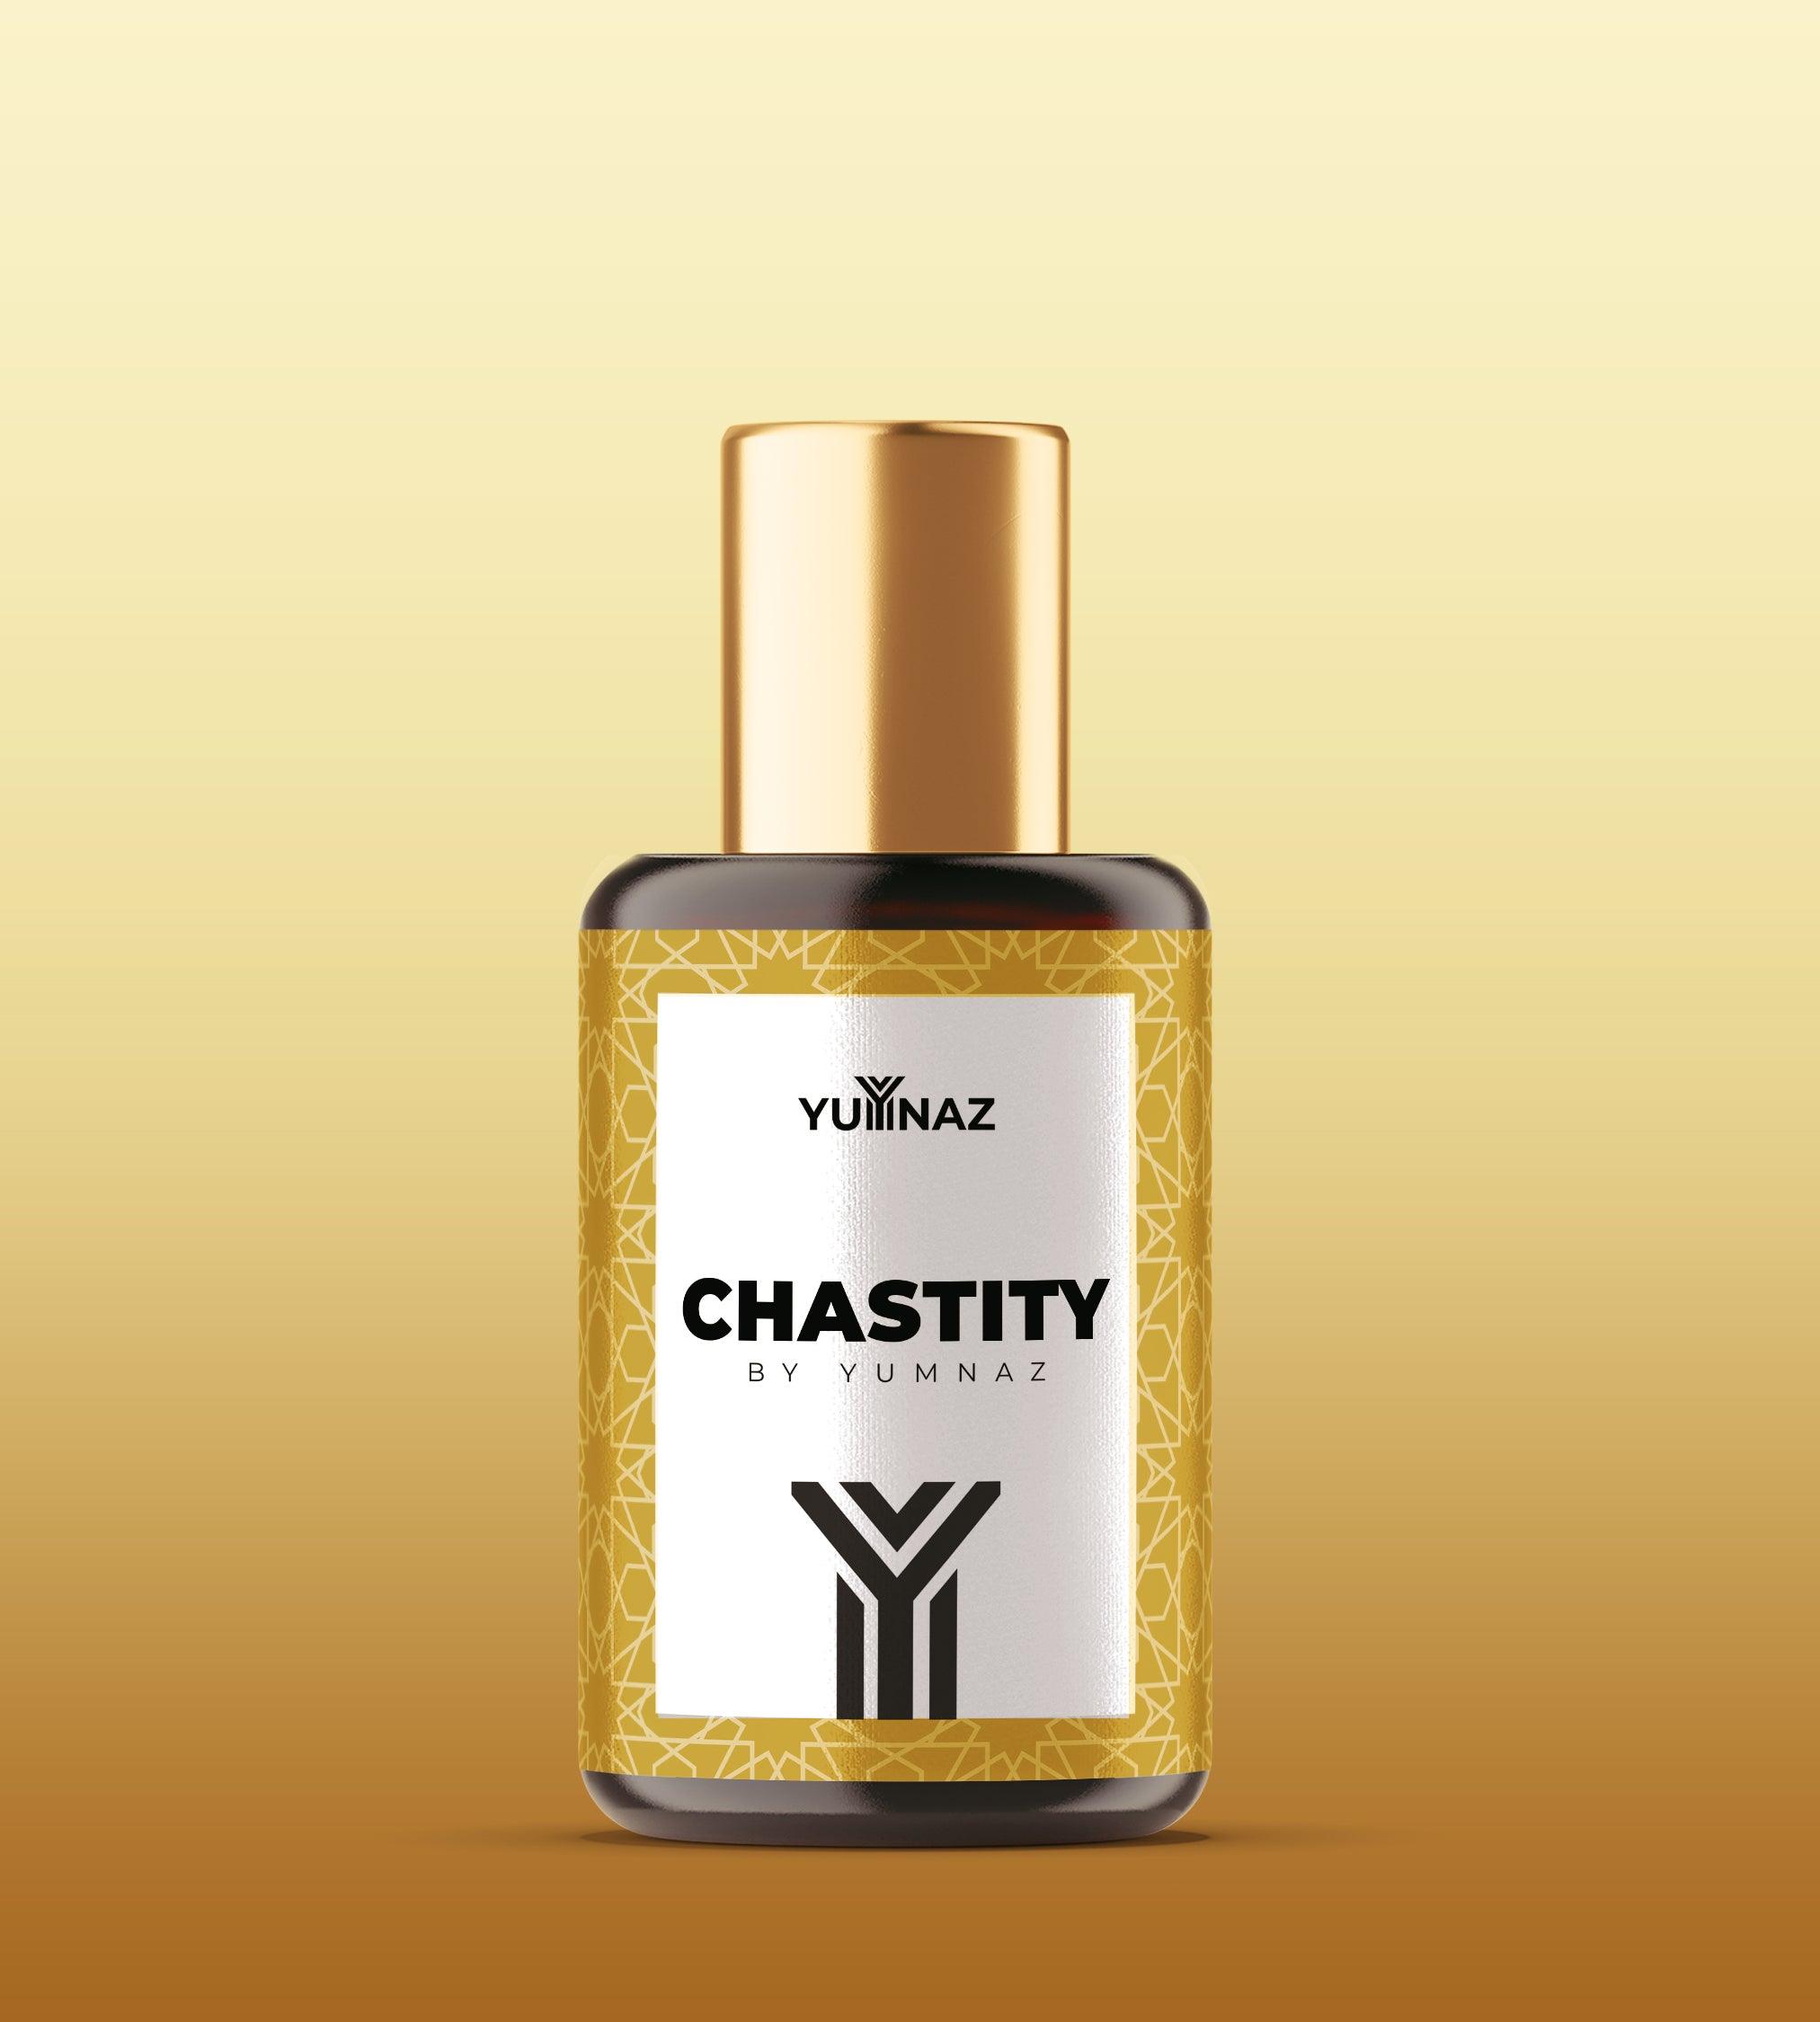 Get the Chastity Perfume on a reasonable Price in Pakistan - yumnaz